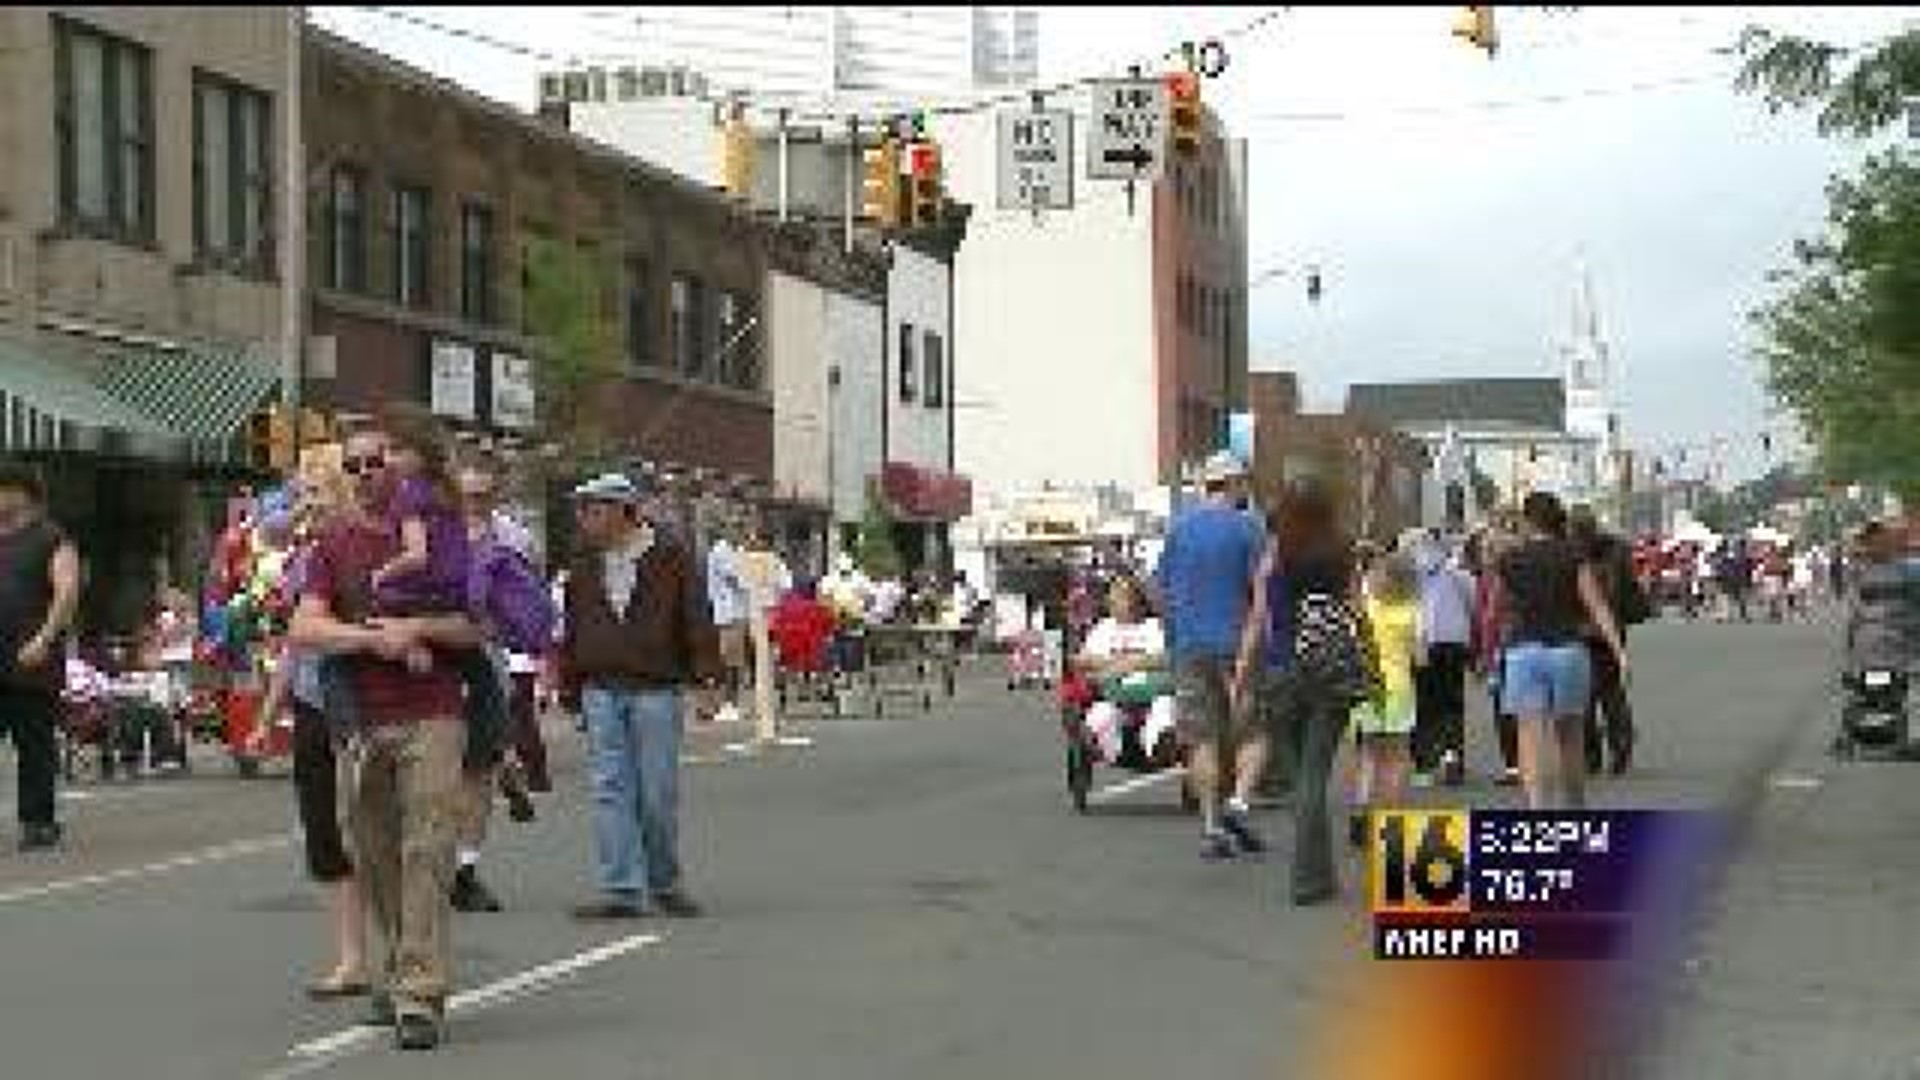 Hazleton’s Funfest Is Here To Stay